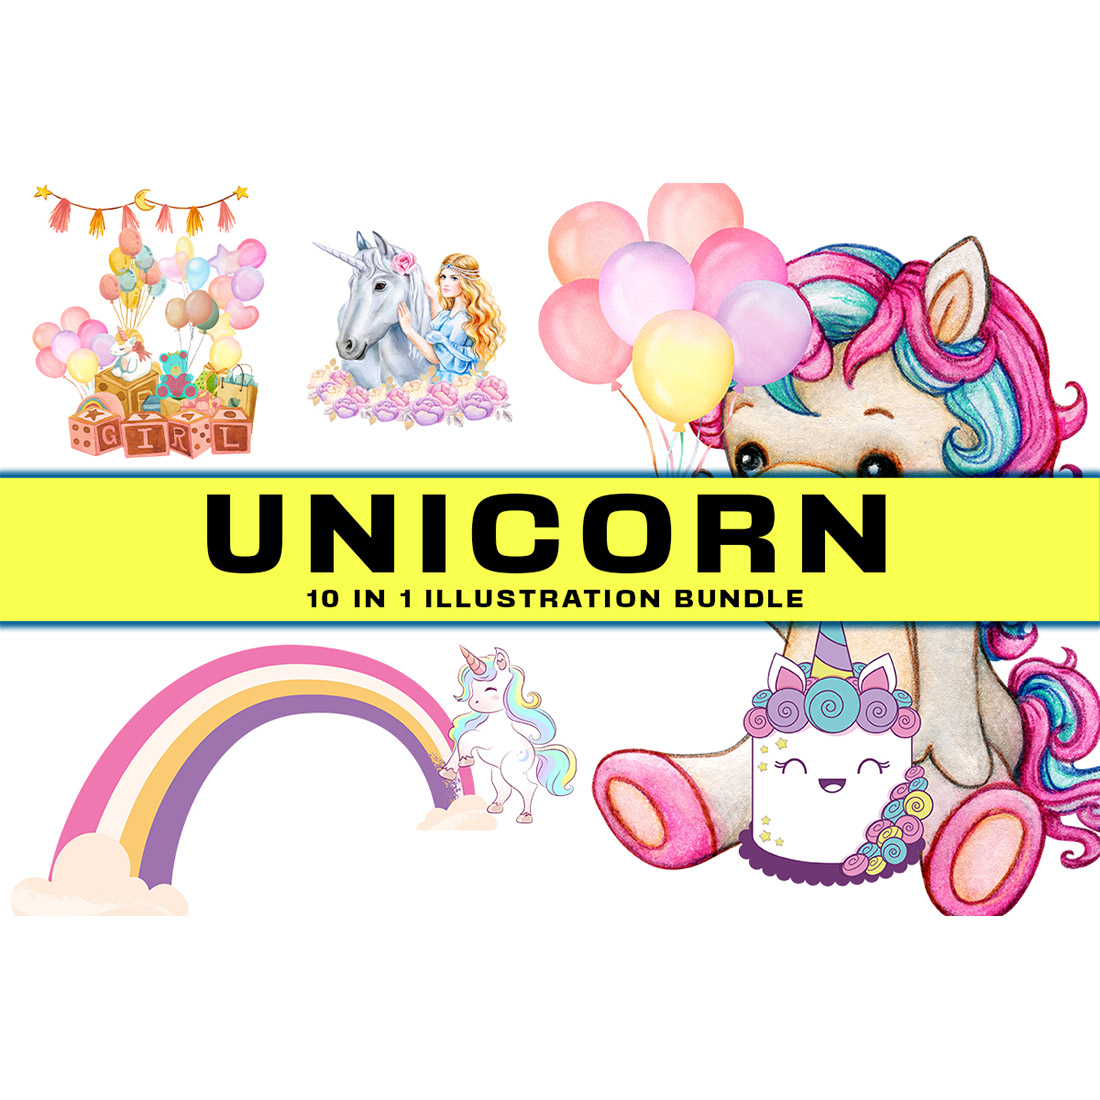 Collection of cute images with unicorns